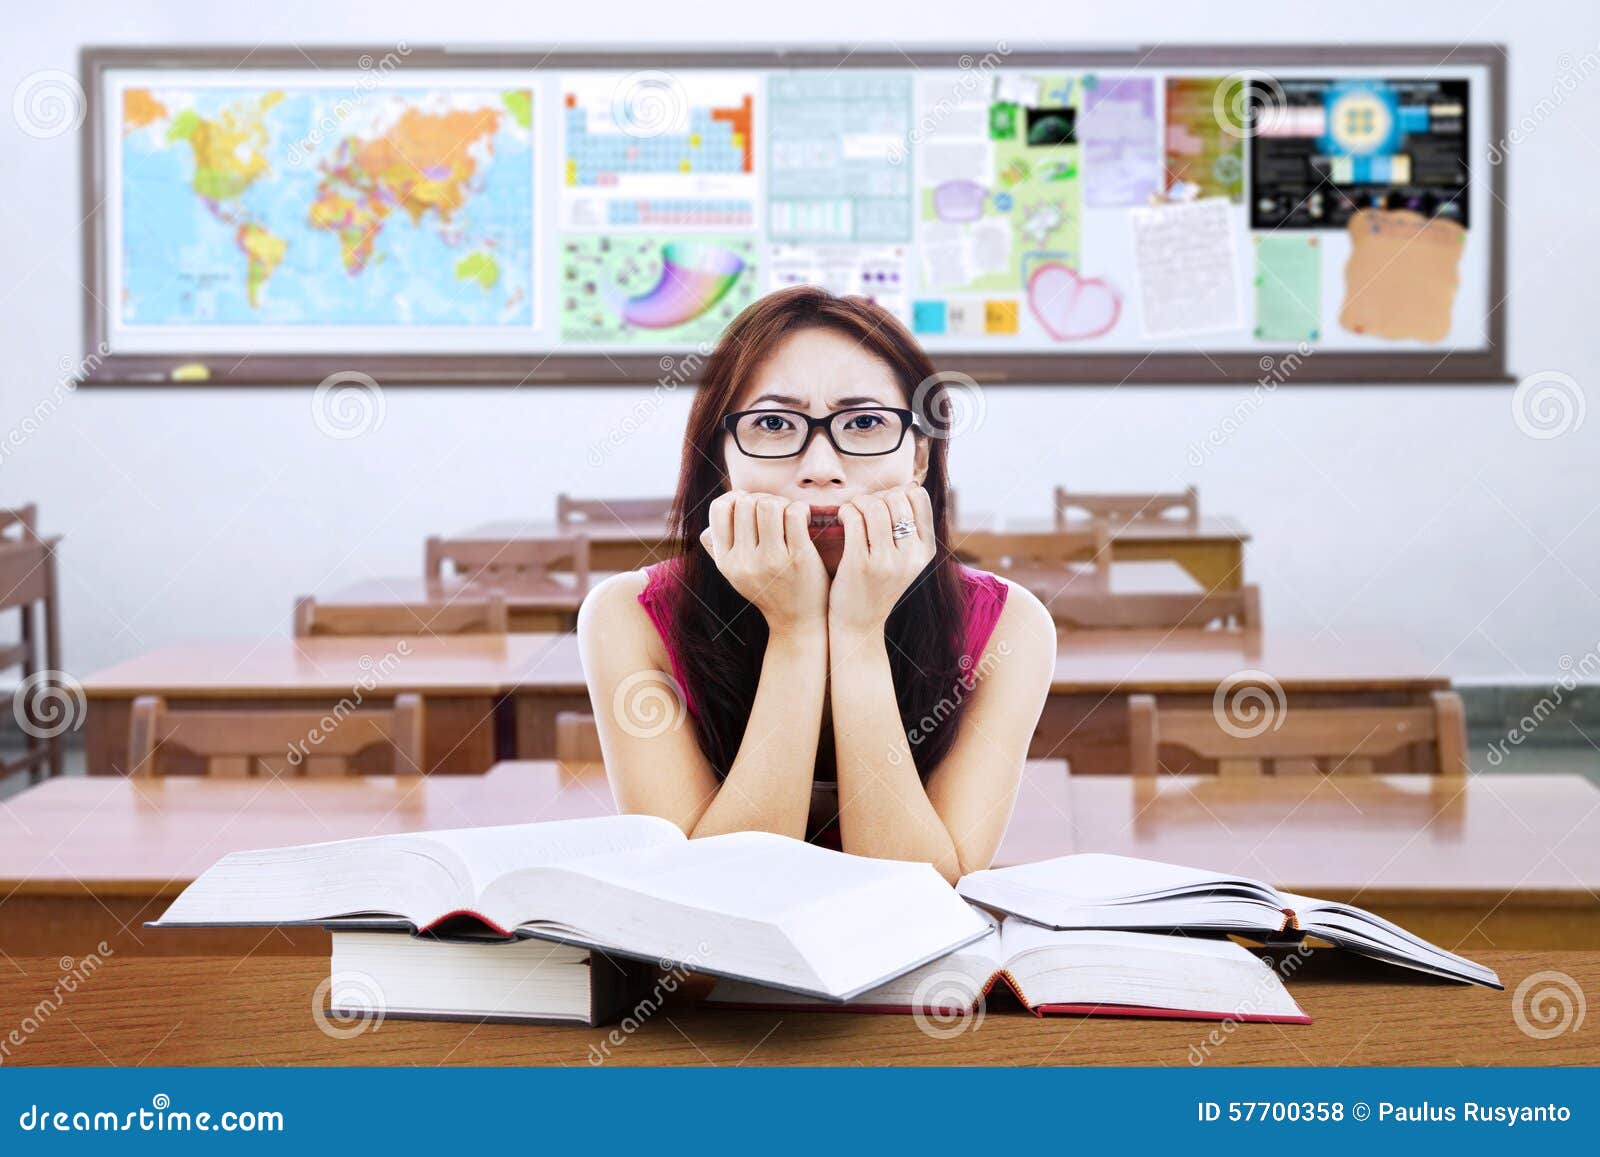 Confused Brunette Student With Books In Class Stock Photo ...